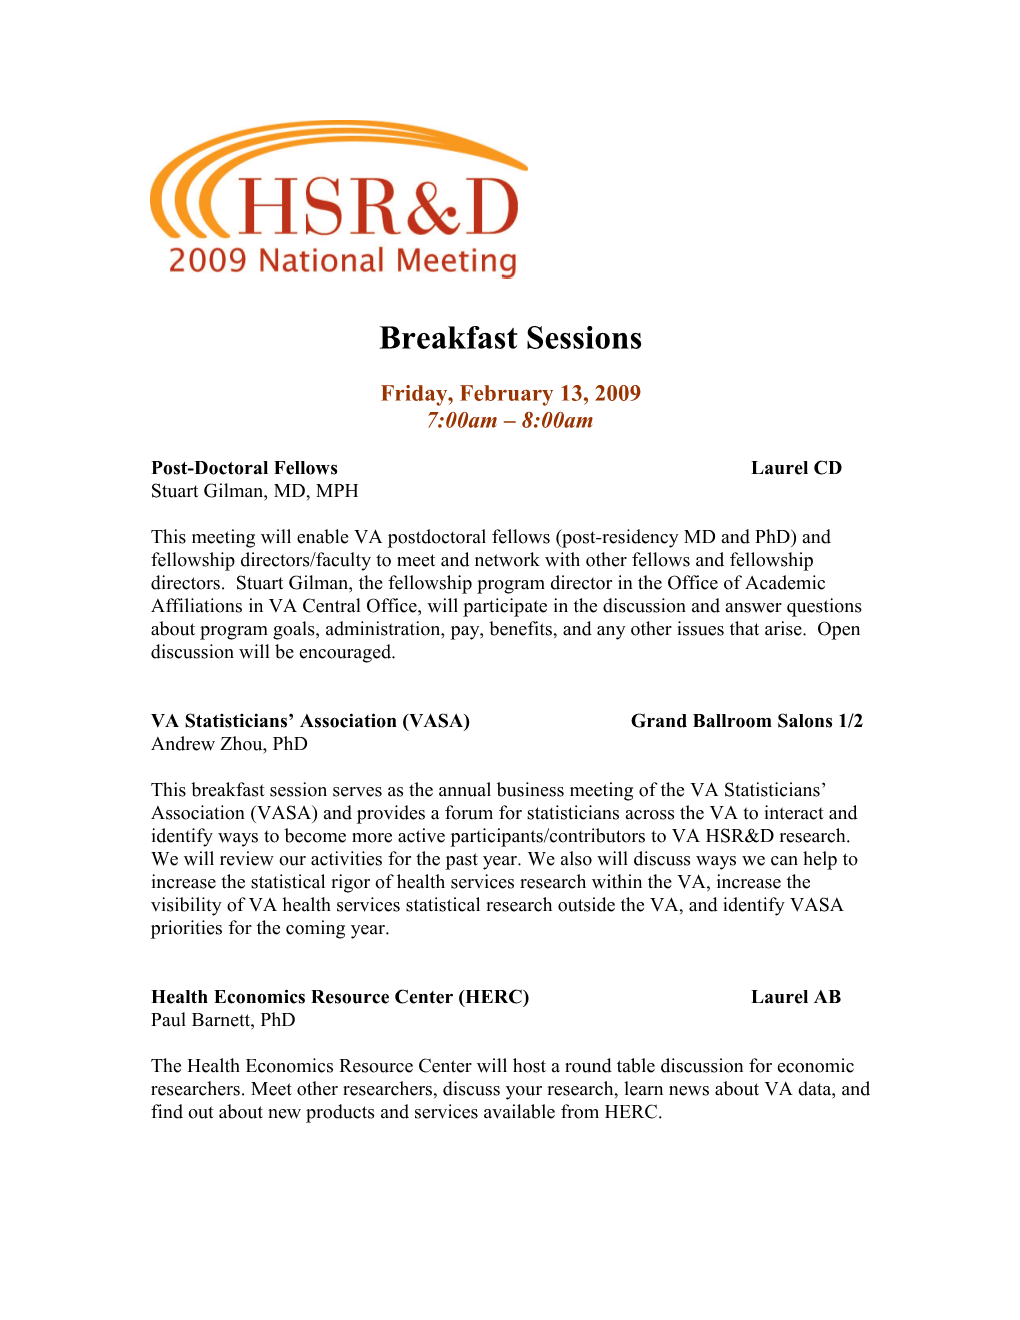 HSR&D National Meeting 2009: Breakfast Sessions